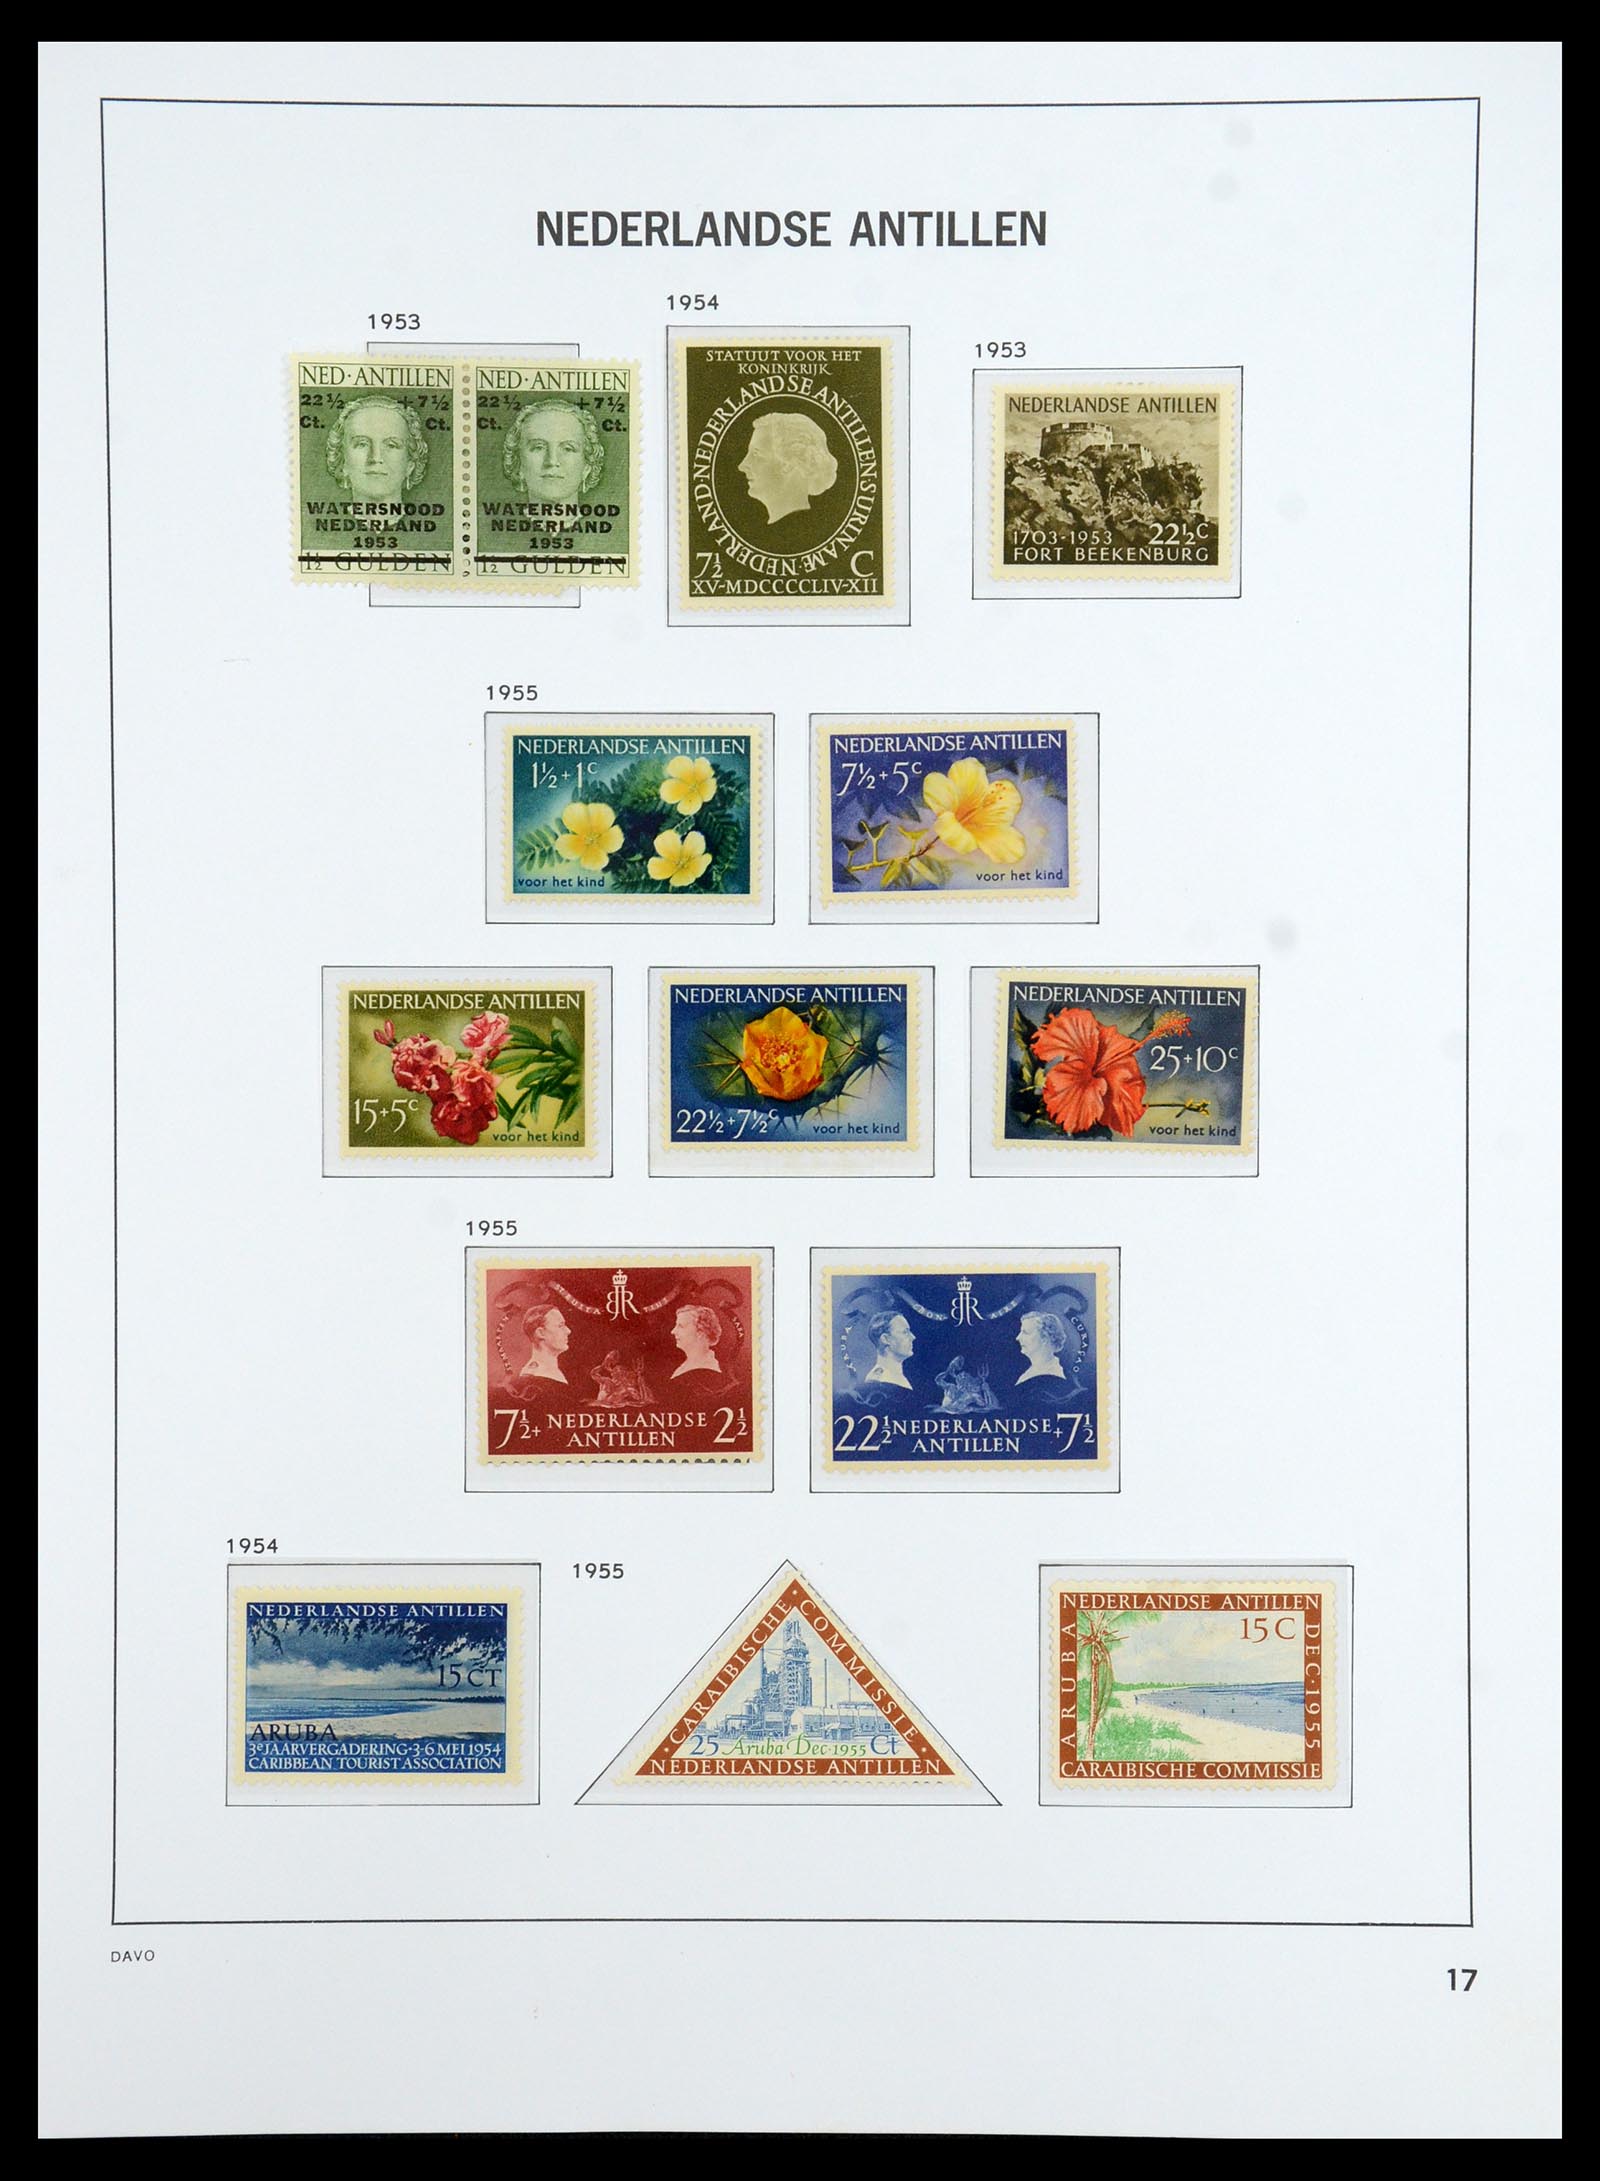 36398 065 - Stamp collection 36398 Dutch territories 1864-1975.